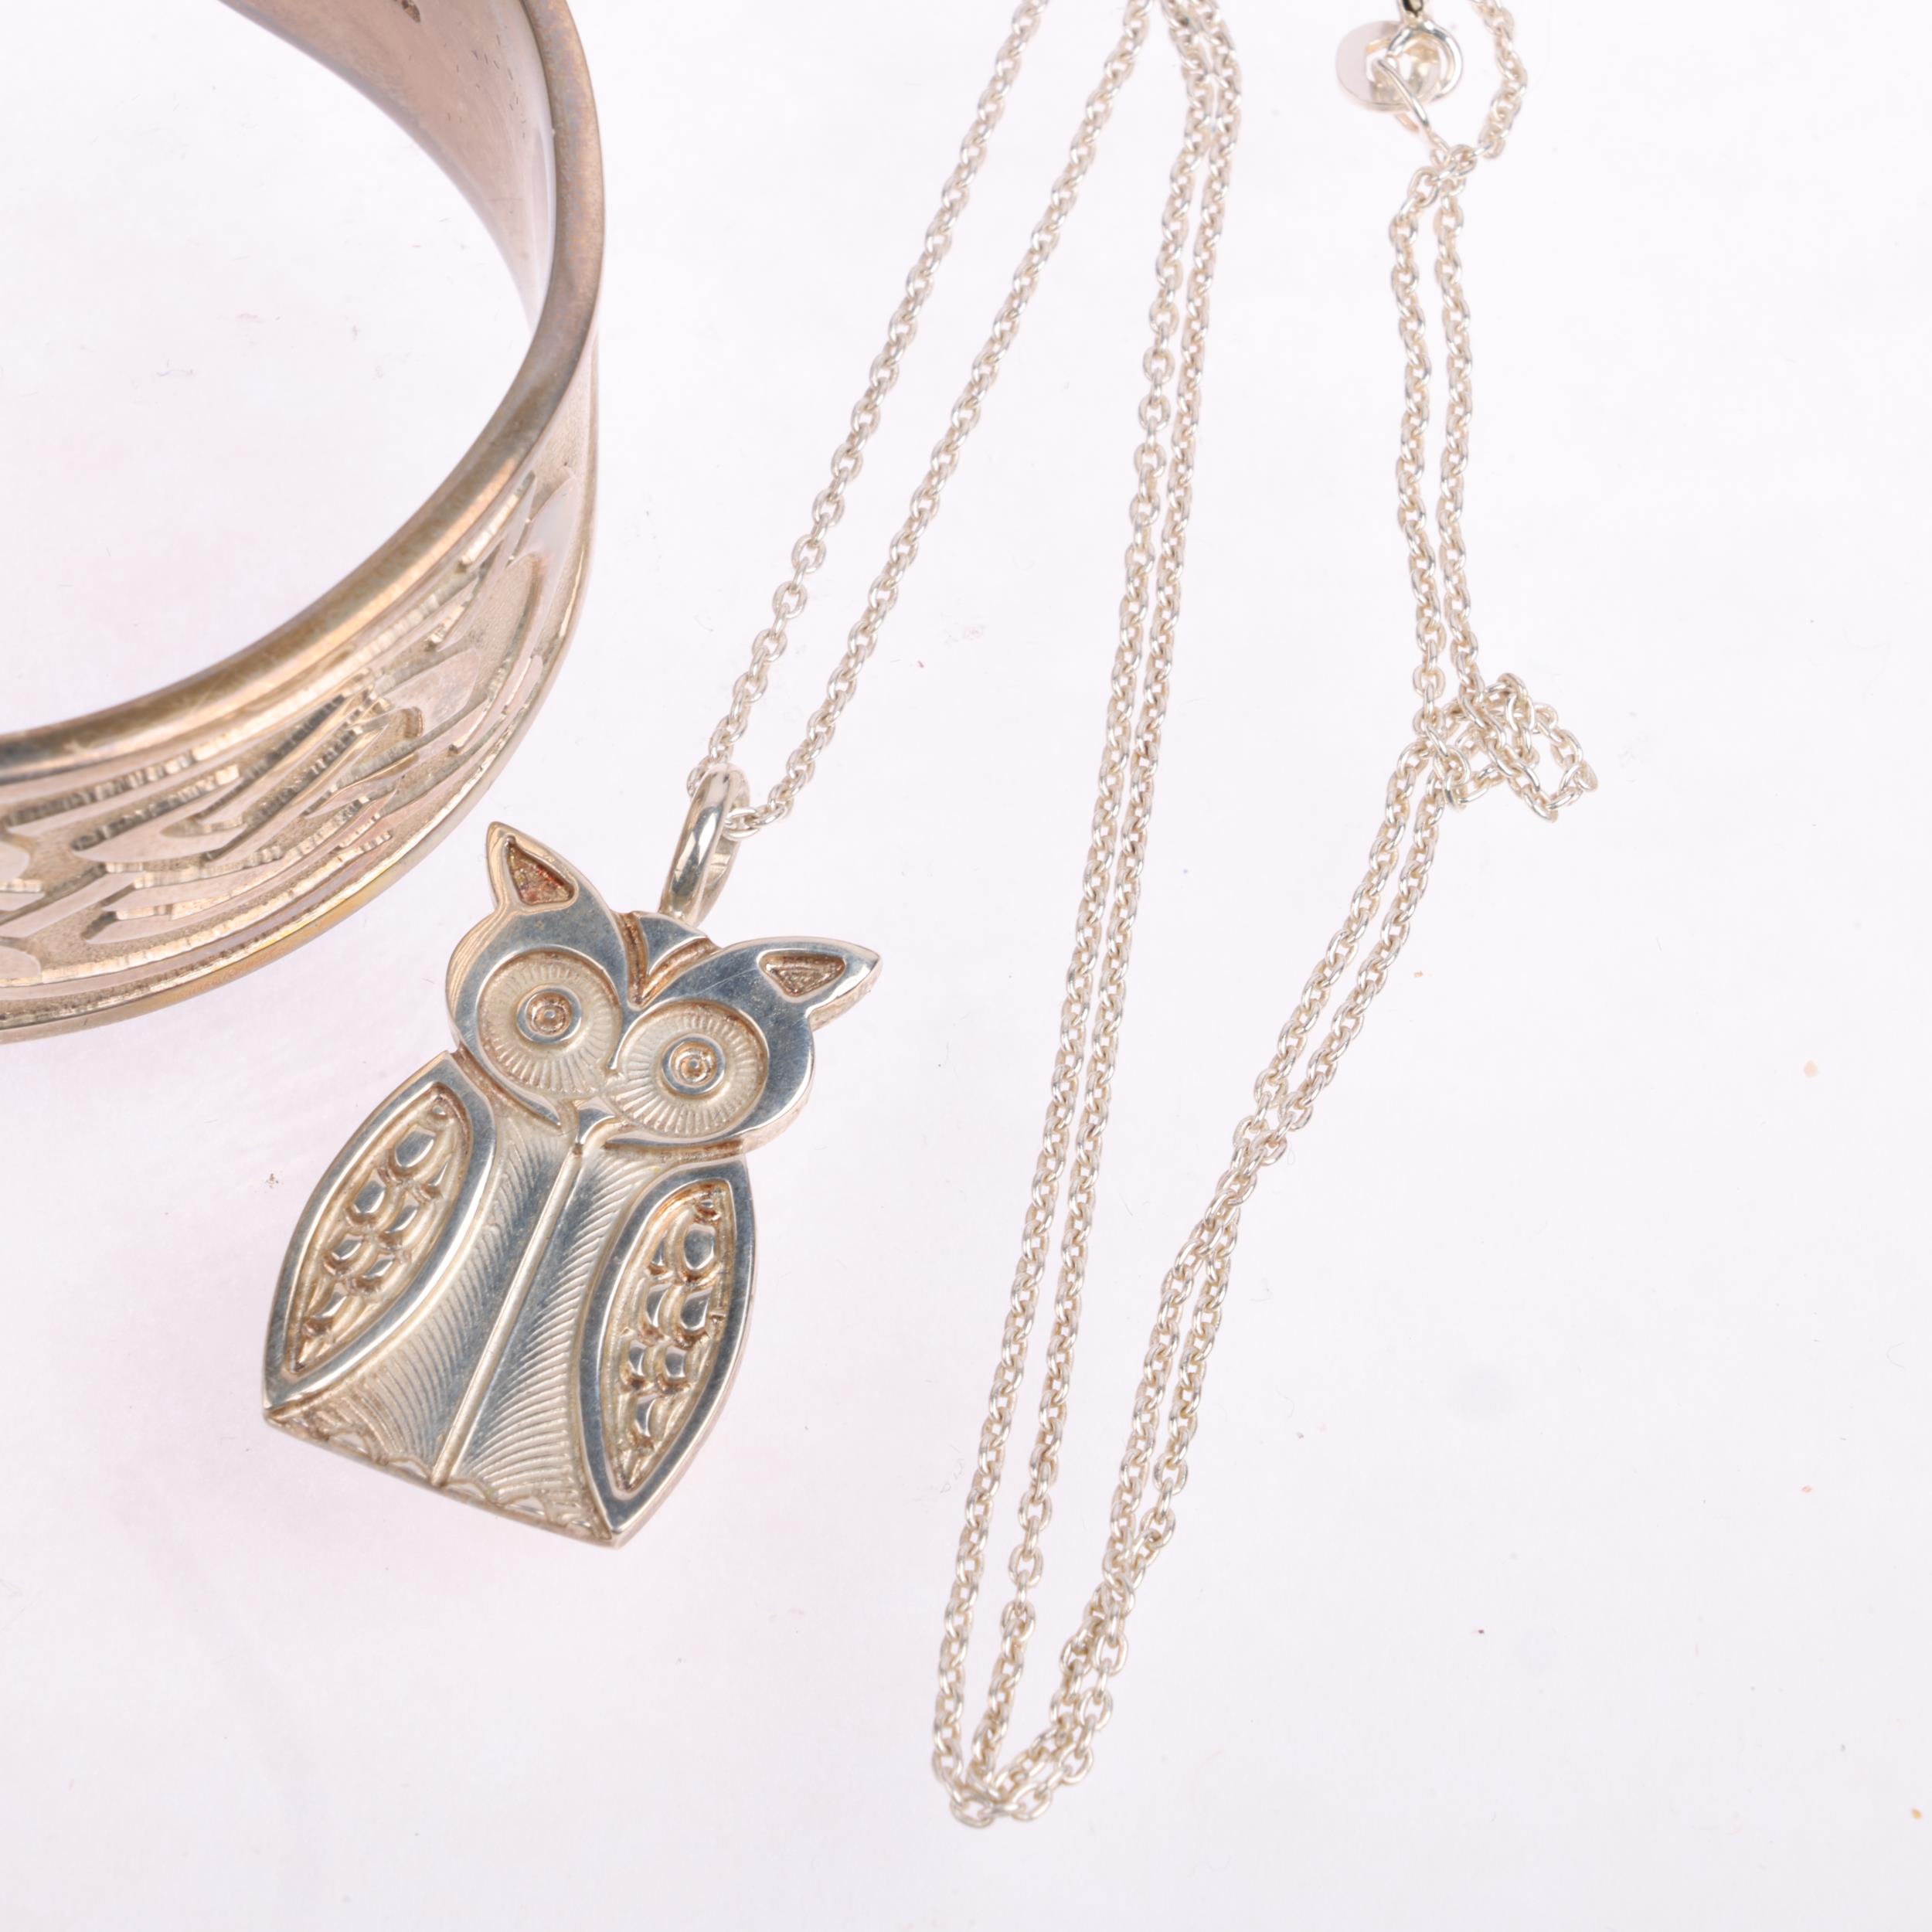 SKYE SILVER - a Scottish silver cuff bangle and owl pendant necklace, bangle 17cm, pendant 29.3mm, - Image 2 of 3